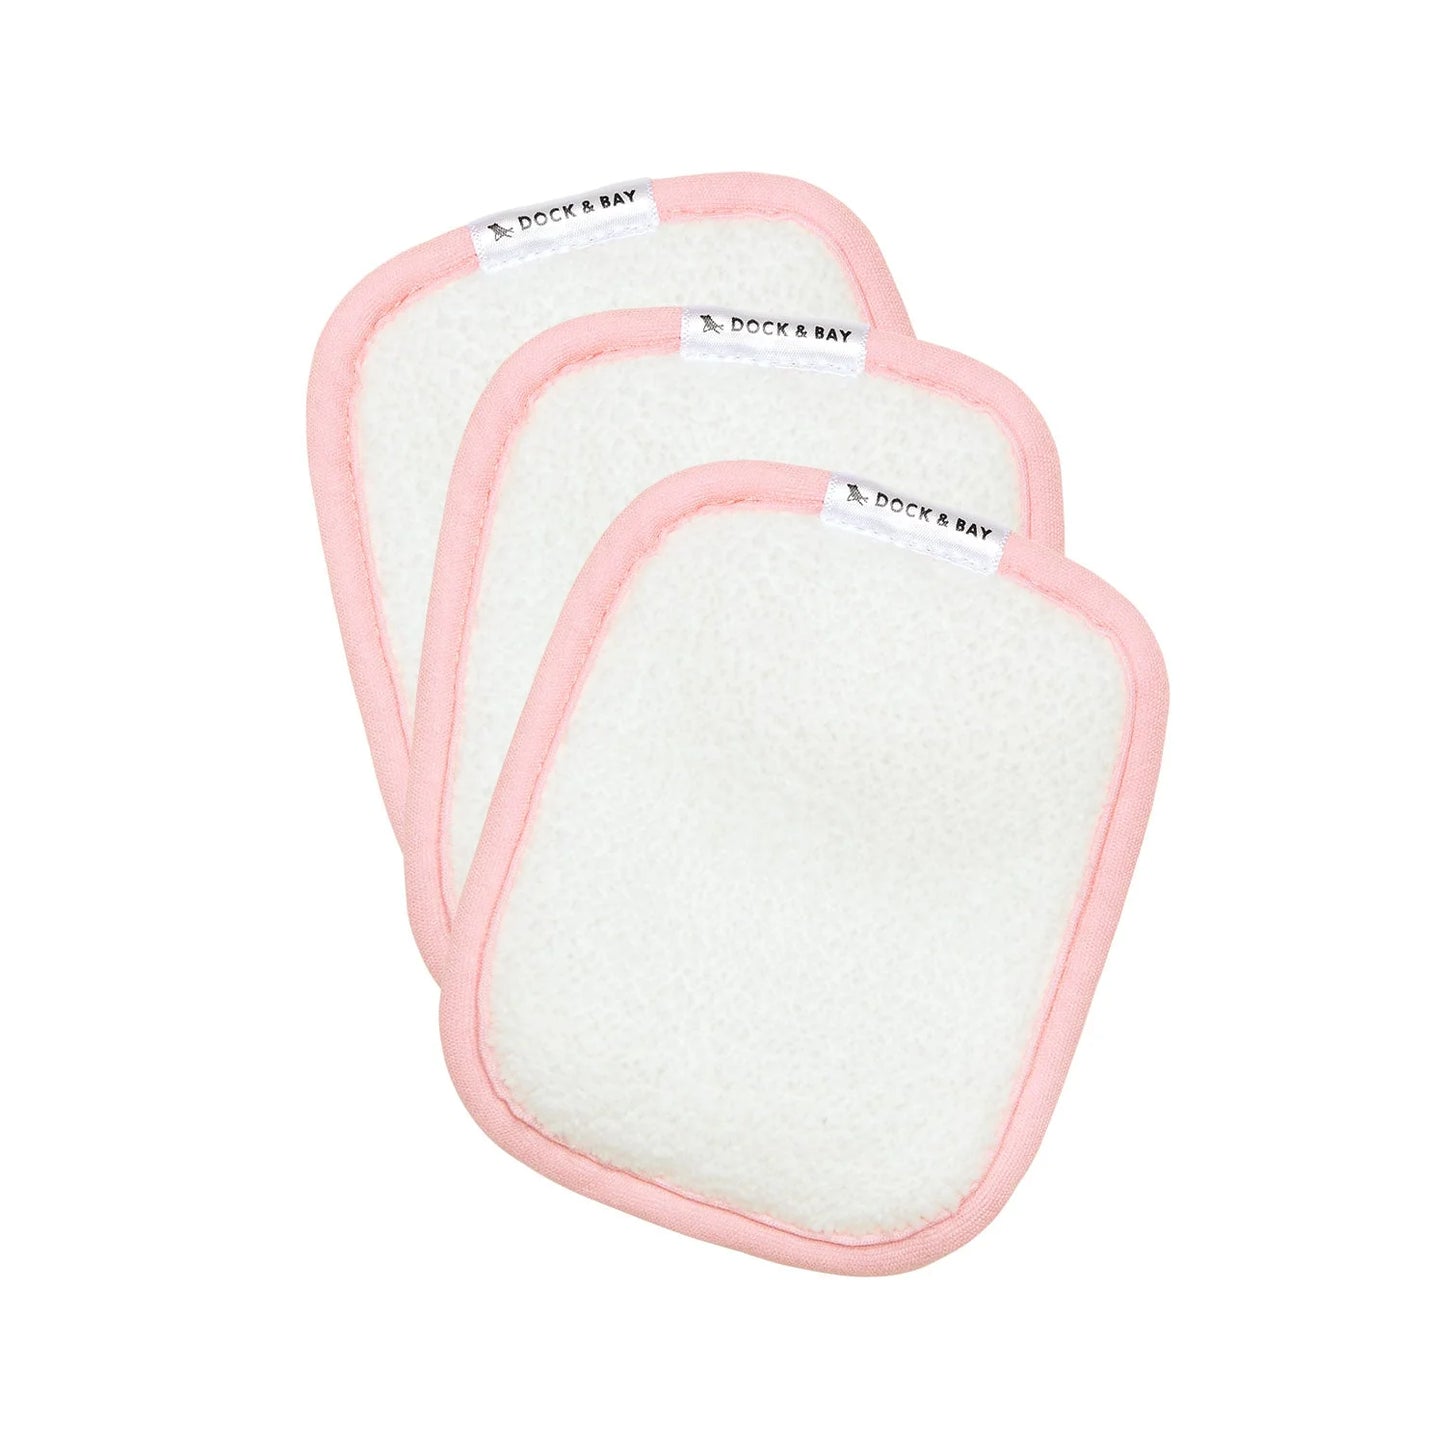 Dock and Bay Reusable Makeup Removers (3-Pack)